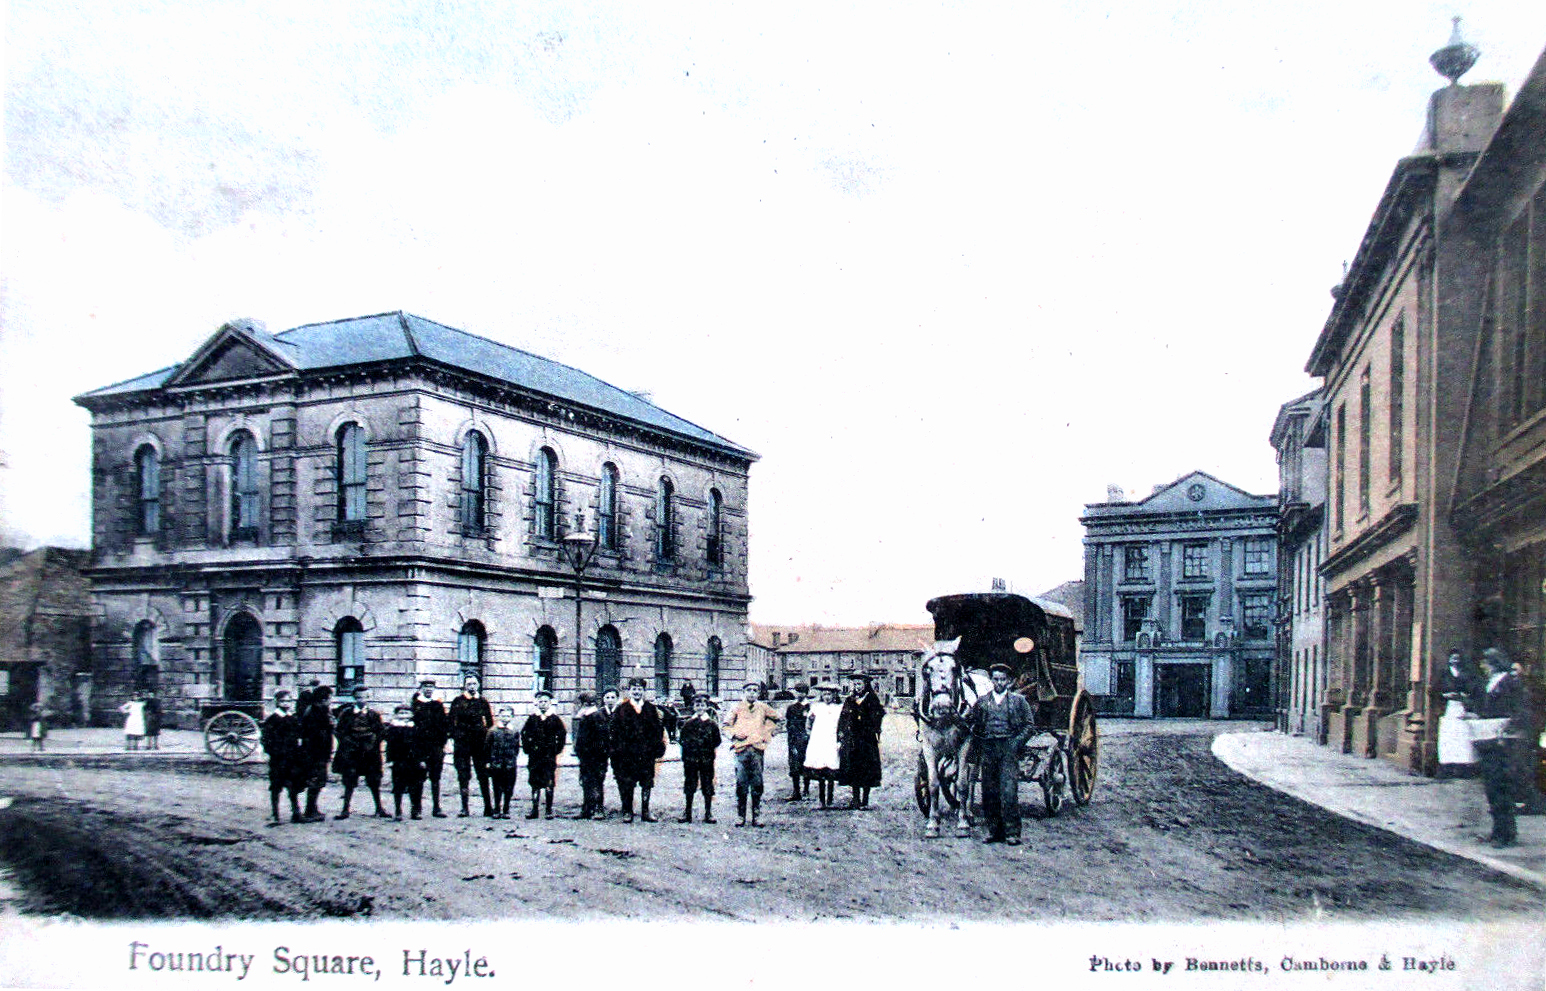 Foundry Square, Hayle